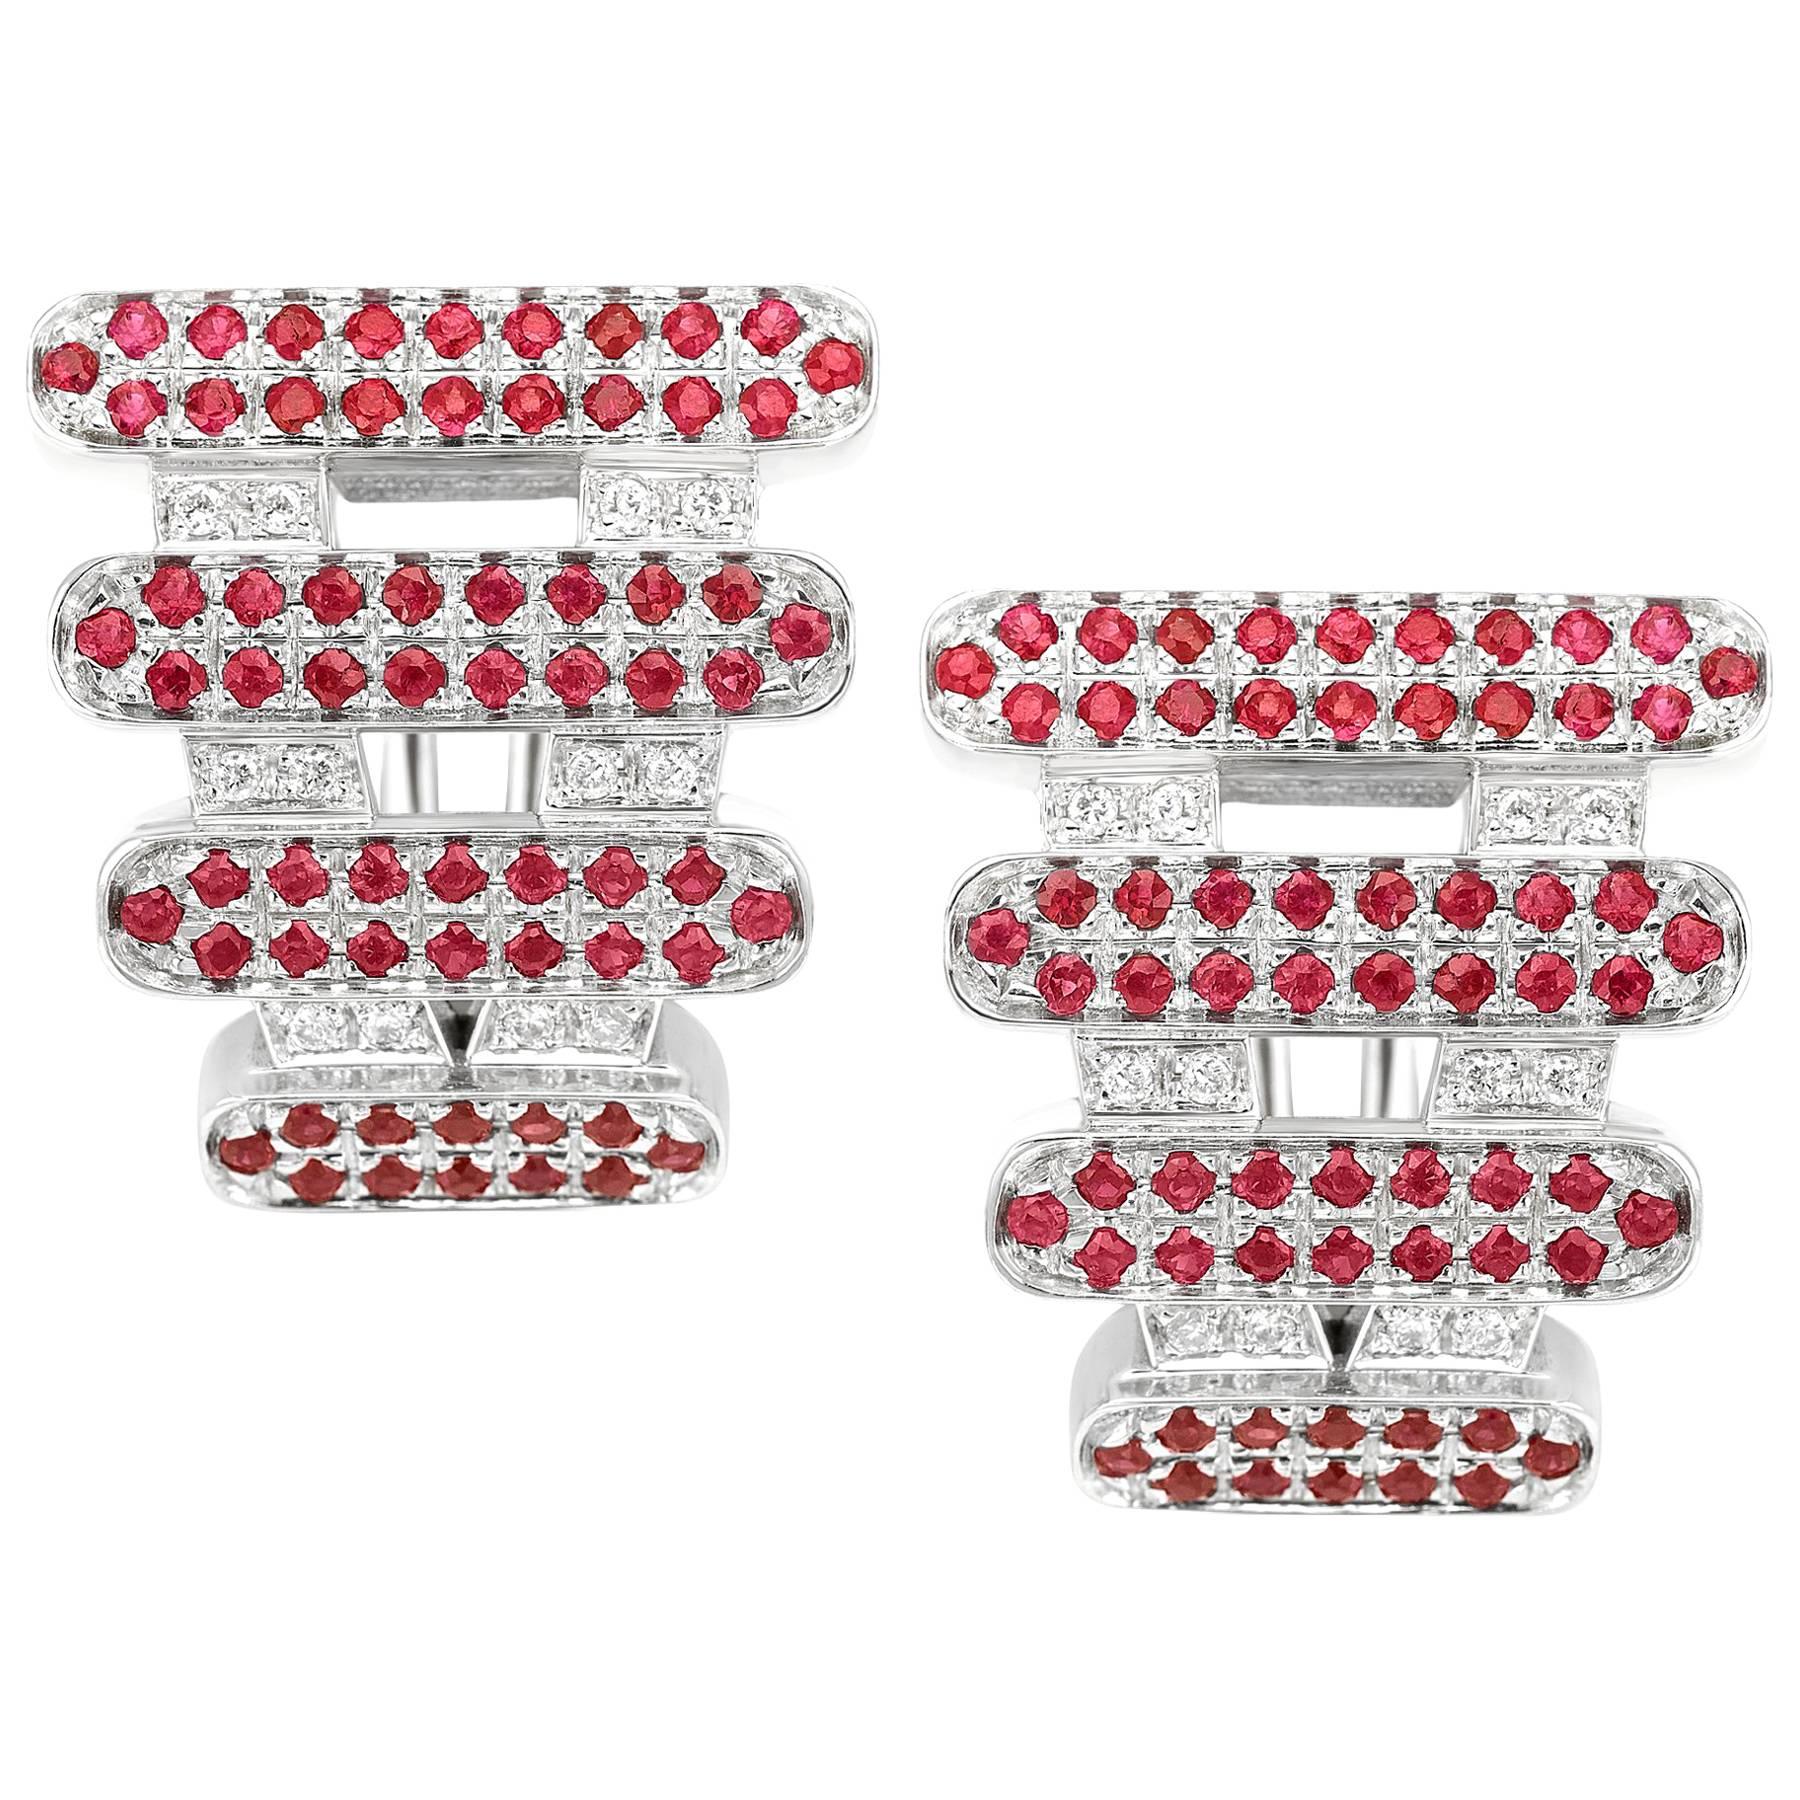 Earrings Collection "Moonlight" 18 Karat White Gold Ruby and White Diamonds